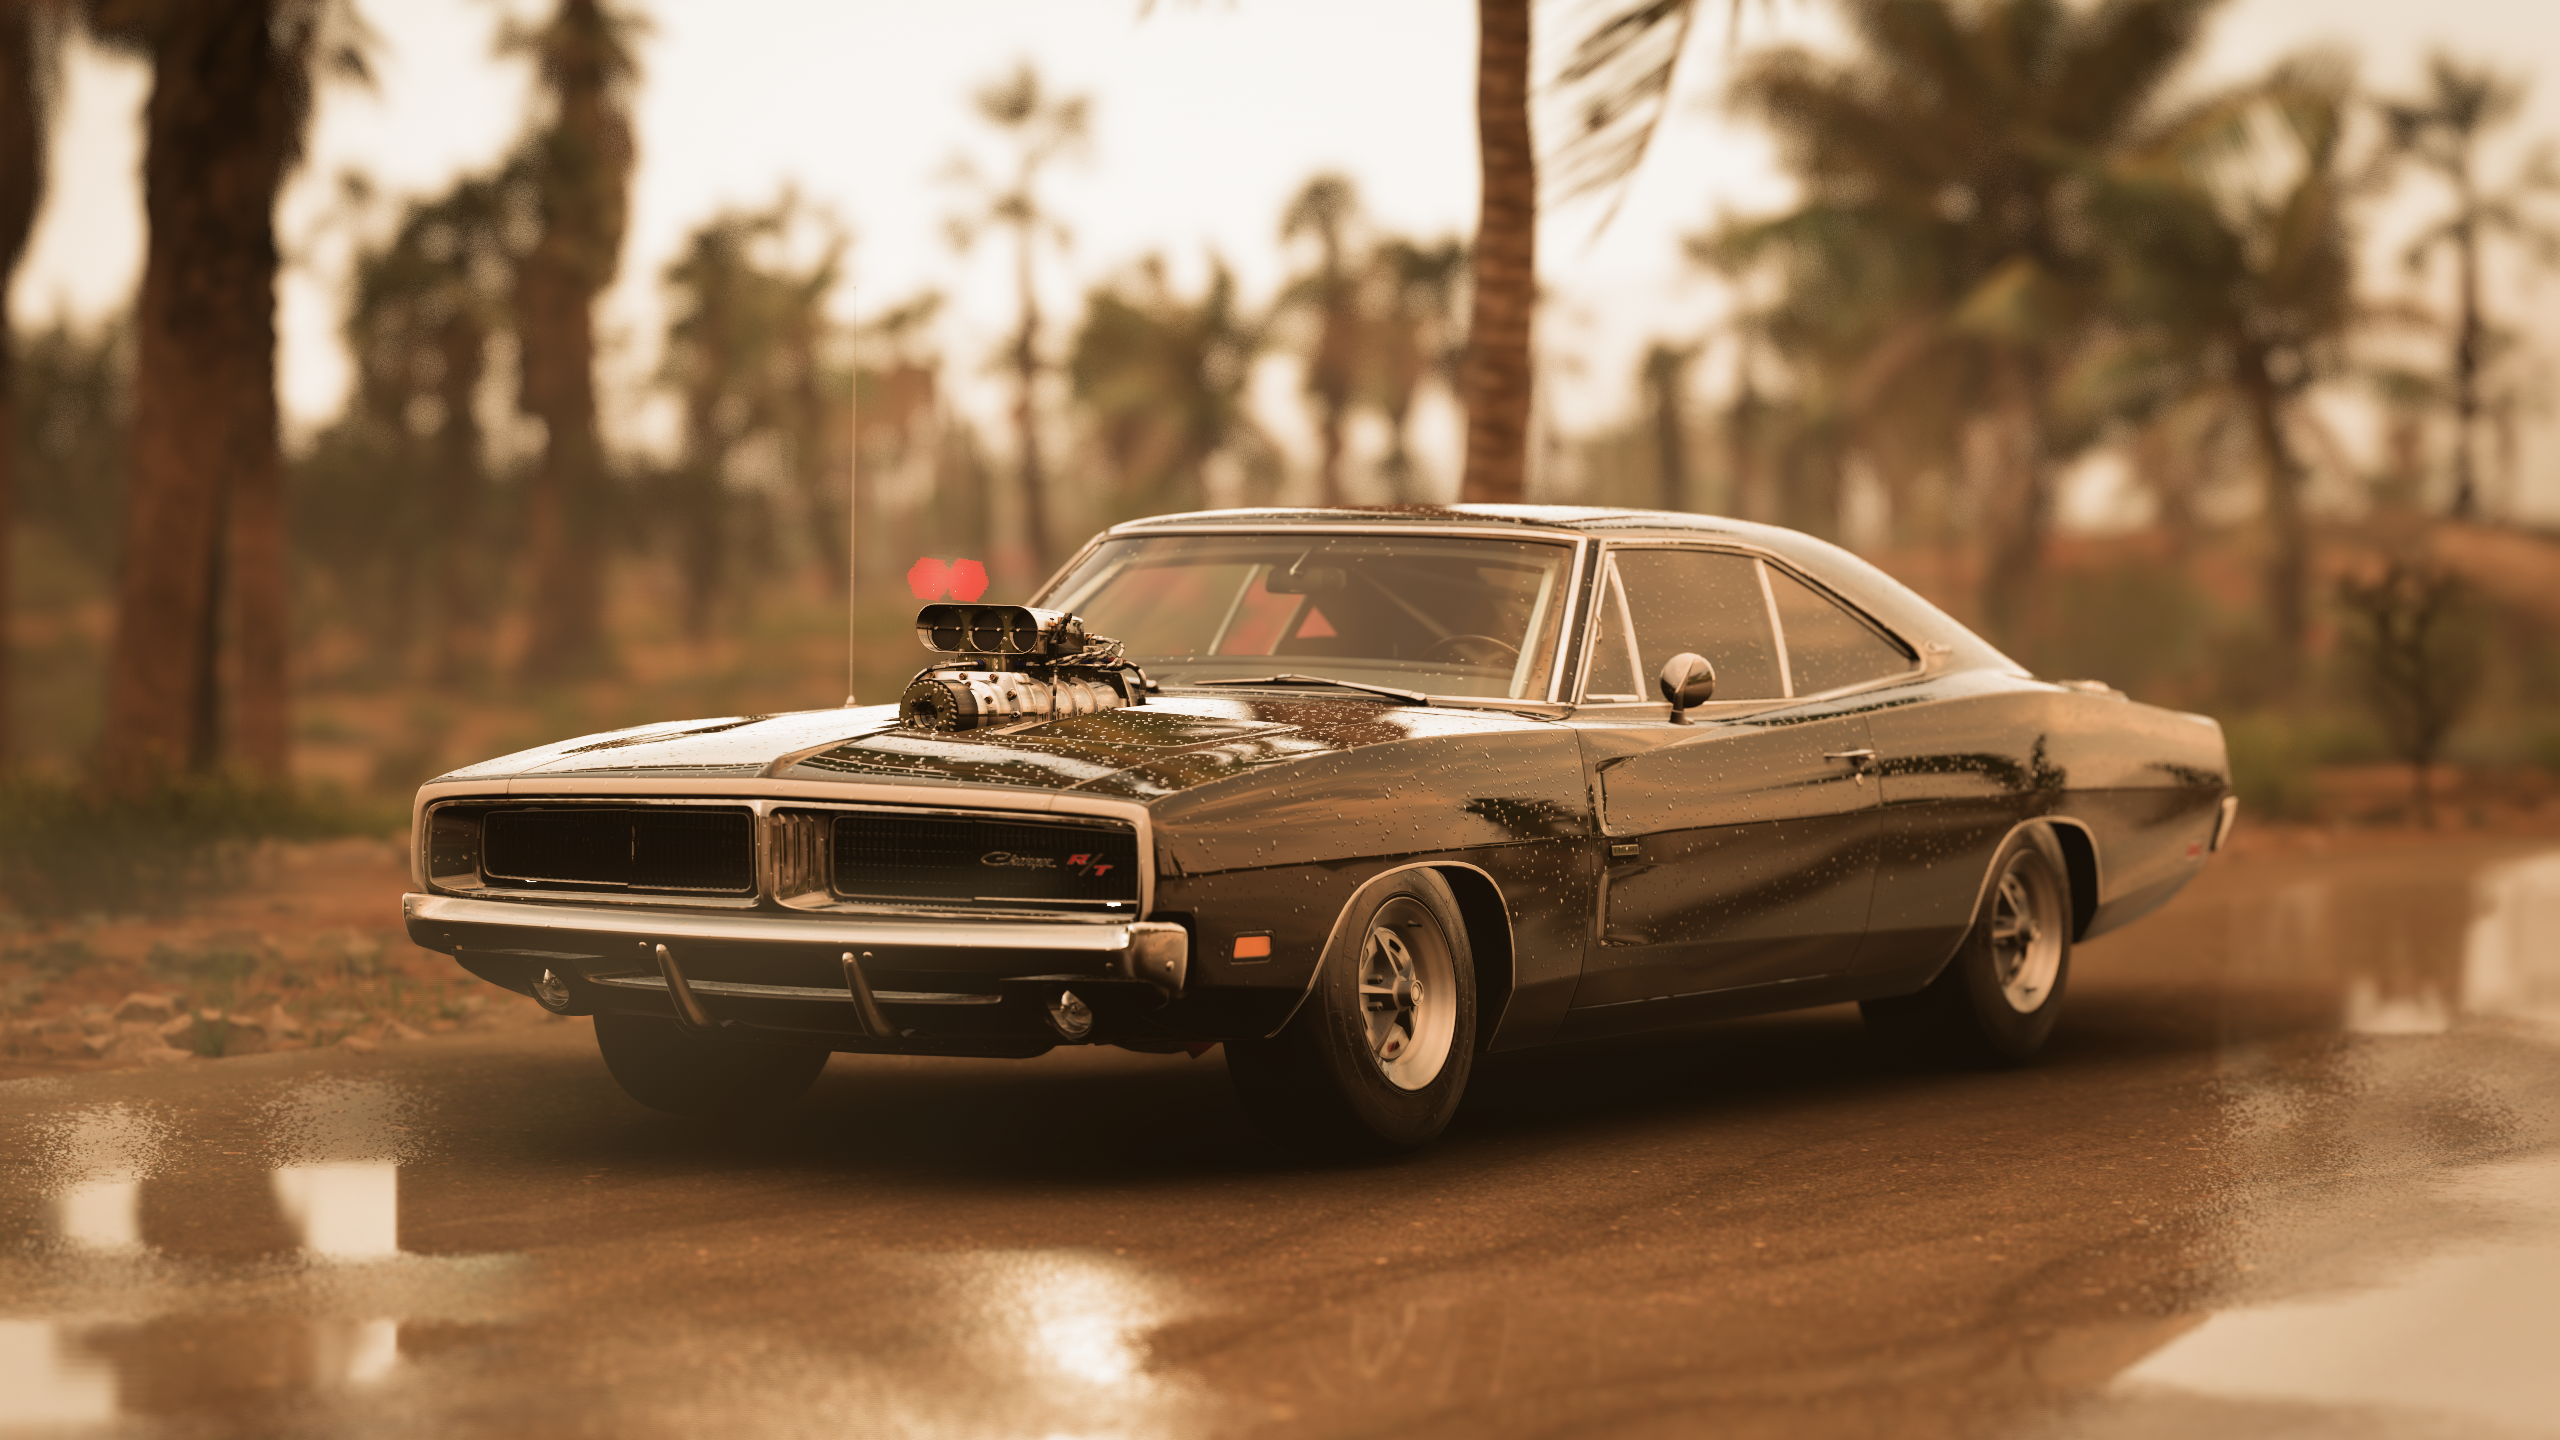 General 2560x1440 Forza Horizon 5 Game CG car Dodge Challenger frontal view video games vehicle trees video game art reflection blurred blurry background